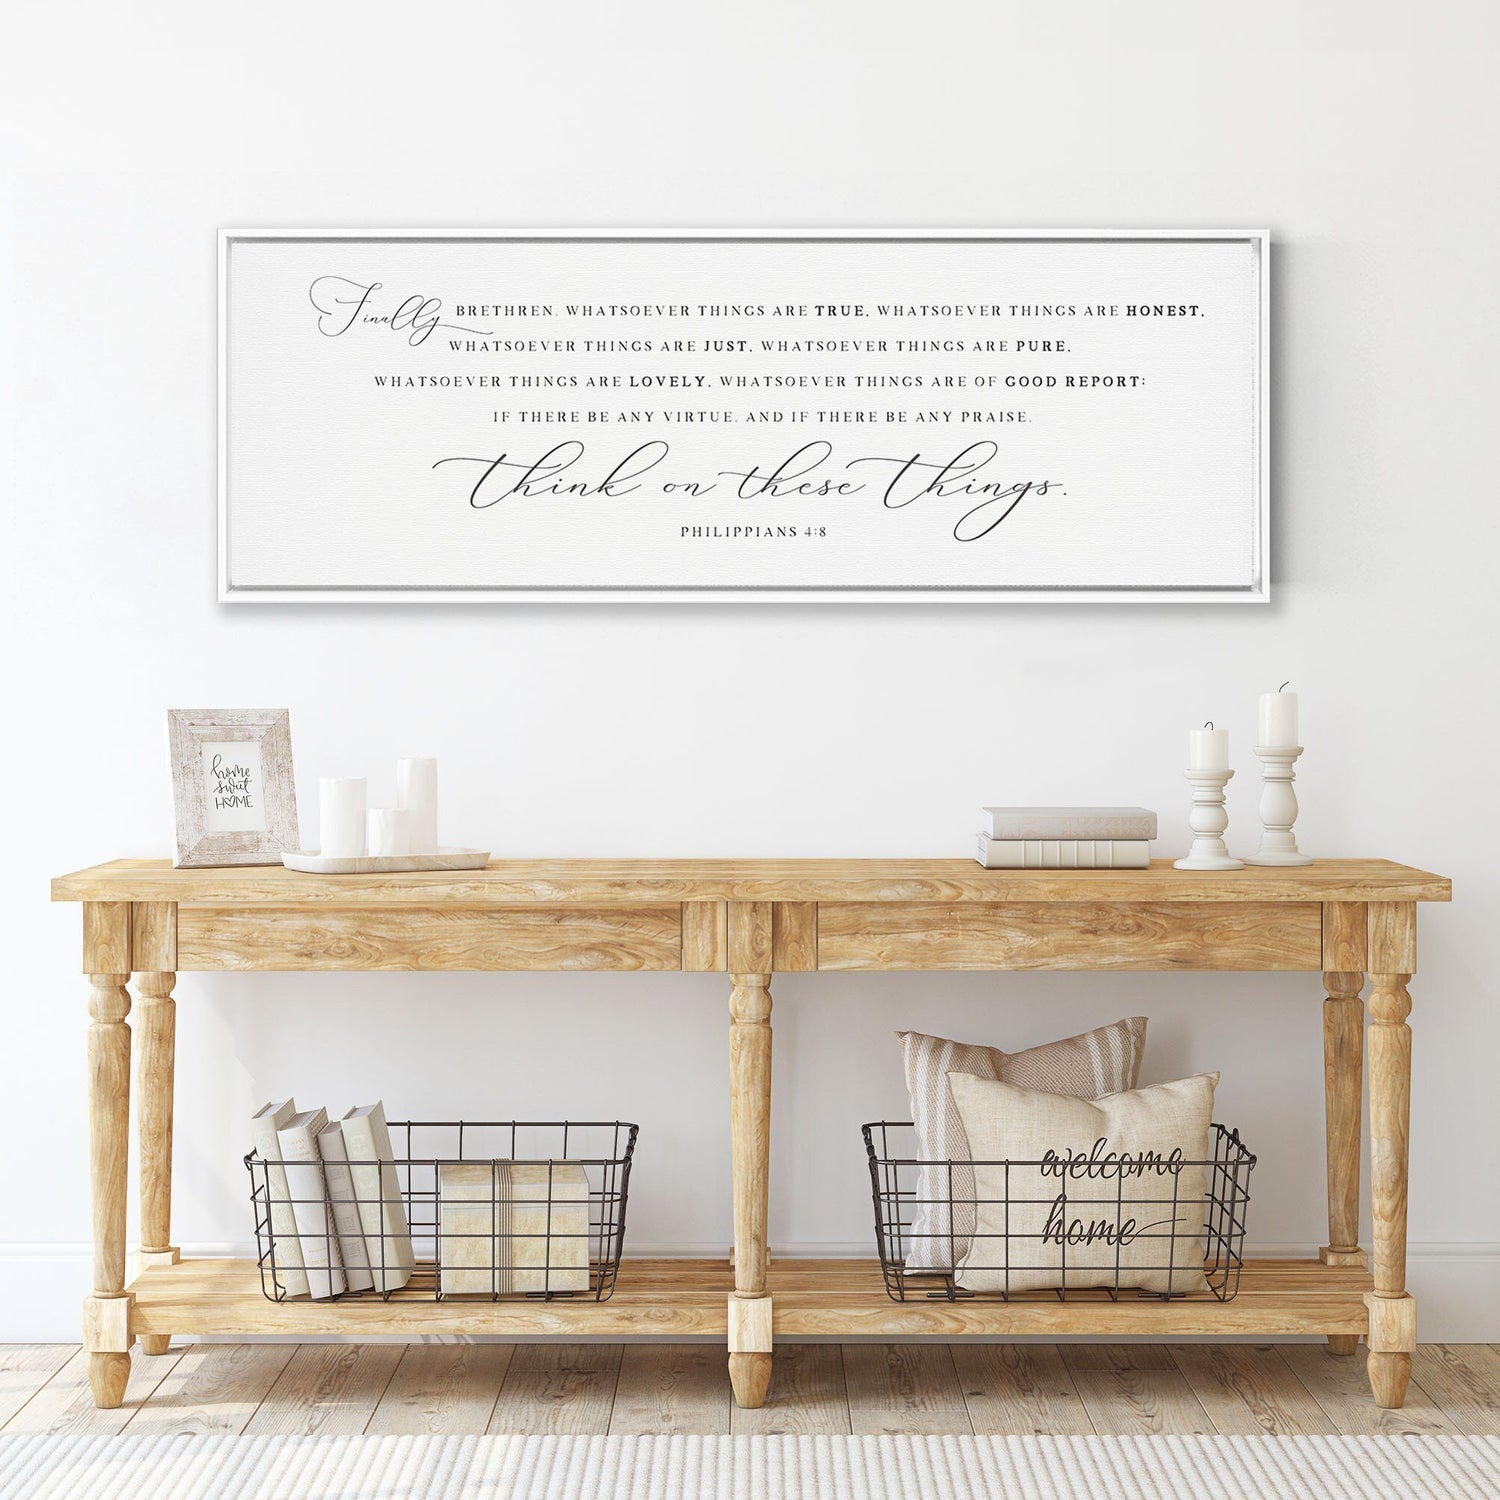 Think On These Things | Scripture Sign | Christian Wall Decor | Bible Verse Wall Art Sign | Philippians 4:8 Sign With Frame Options - Forever Written